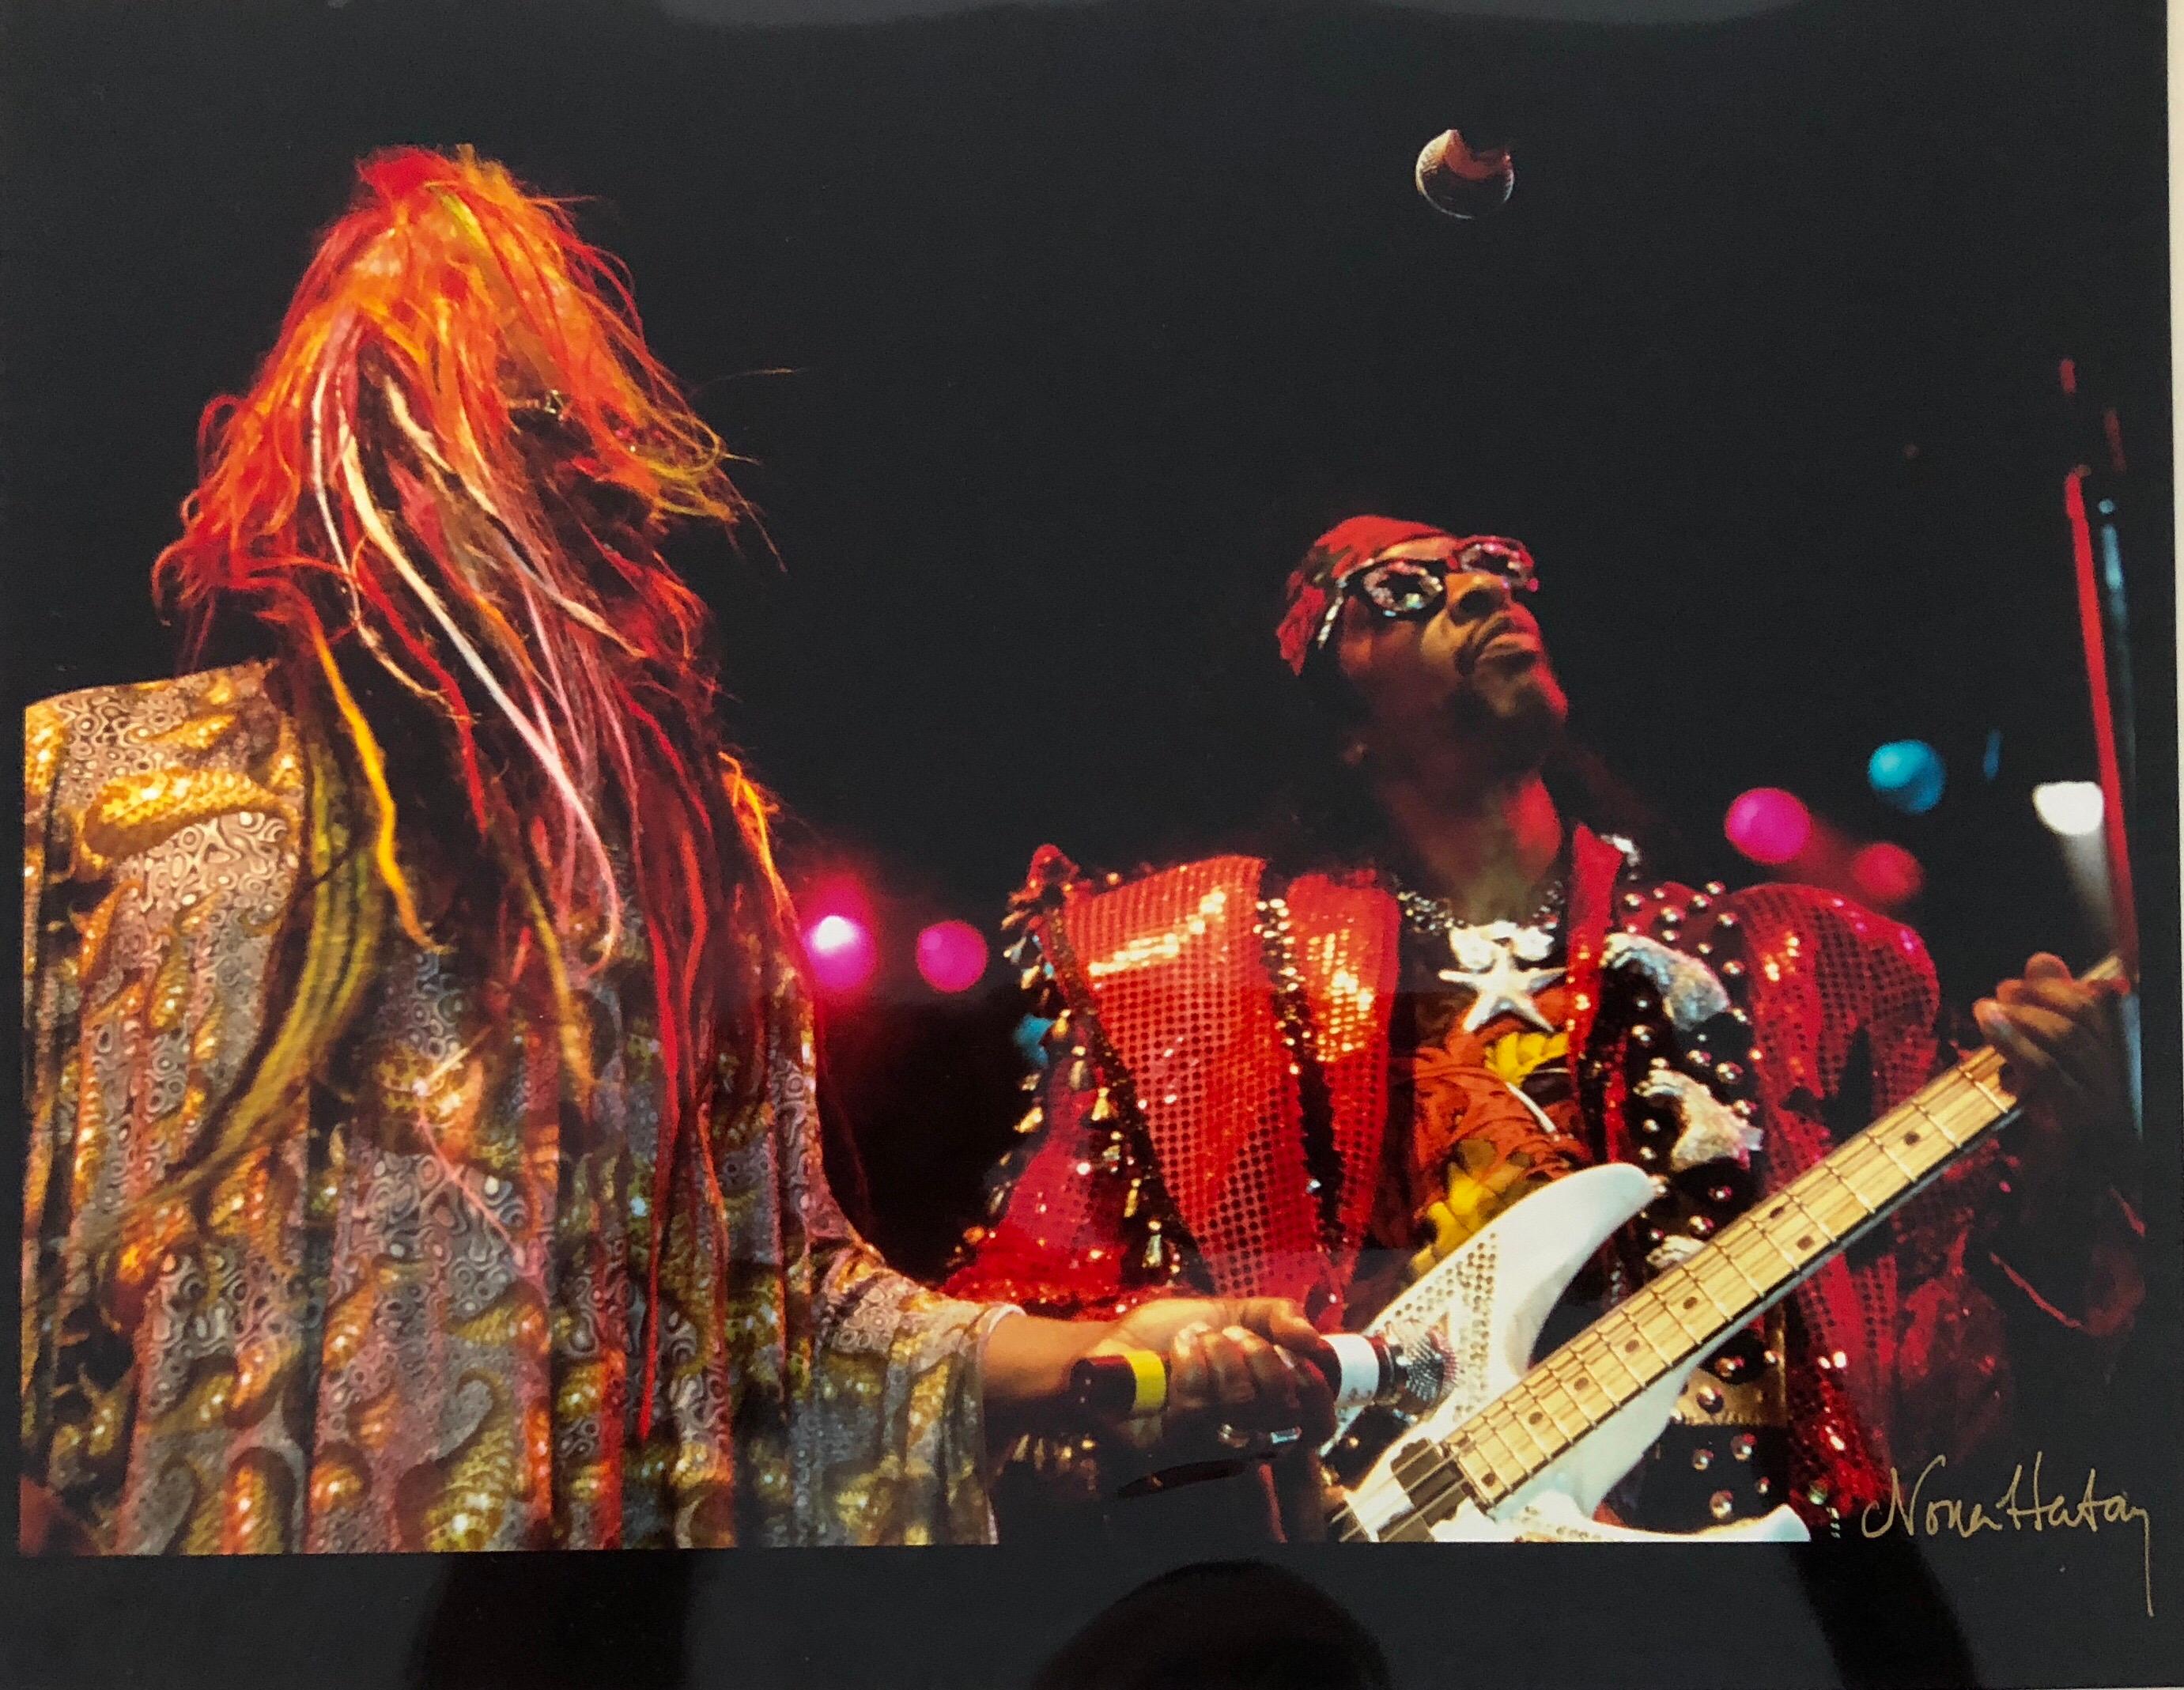 Nona Hatay Figurative Photograph - Color Rock & Roll Photo Hand Signed Woodstock Music Festival African American 